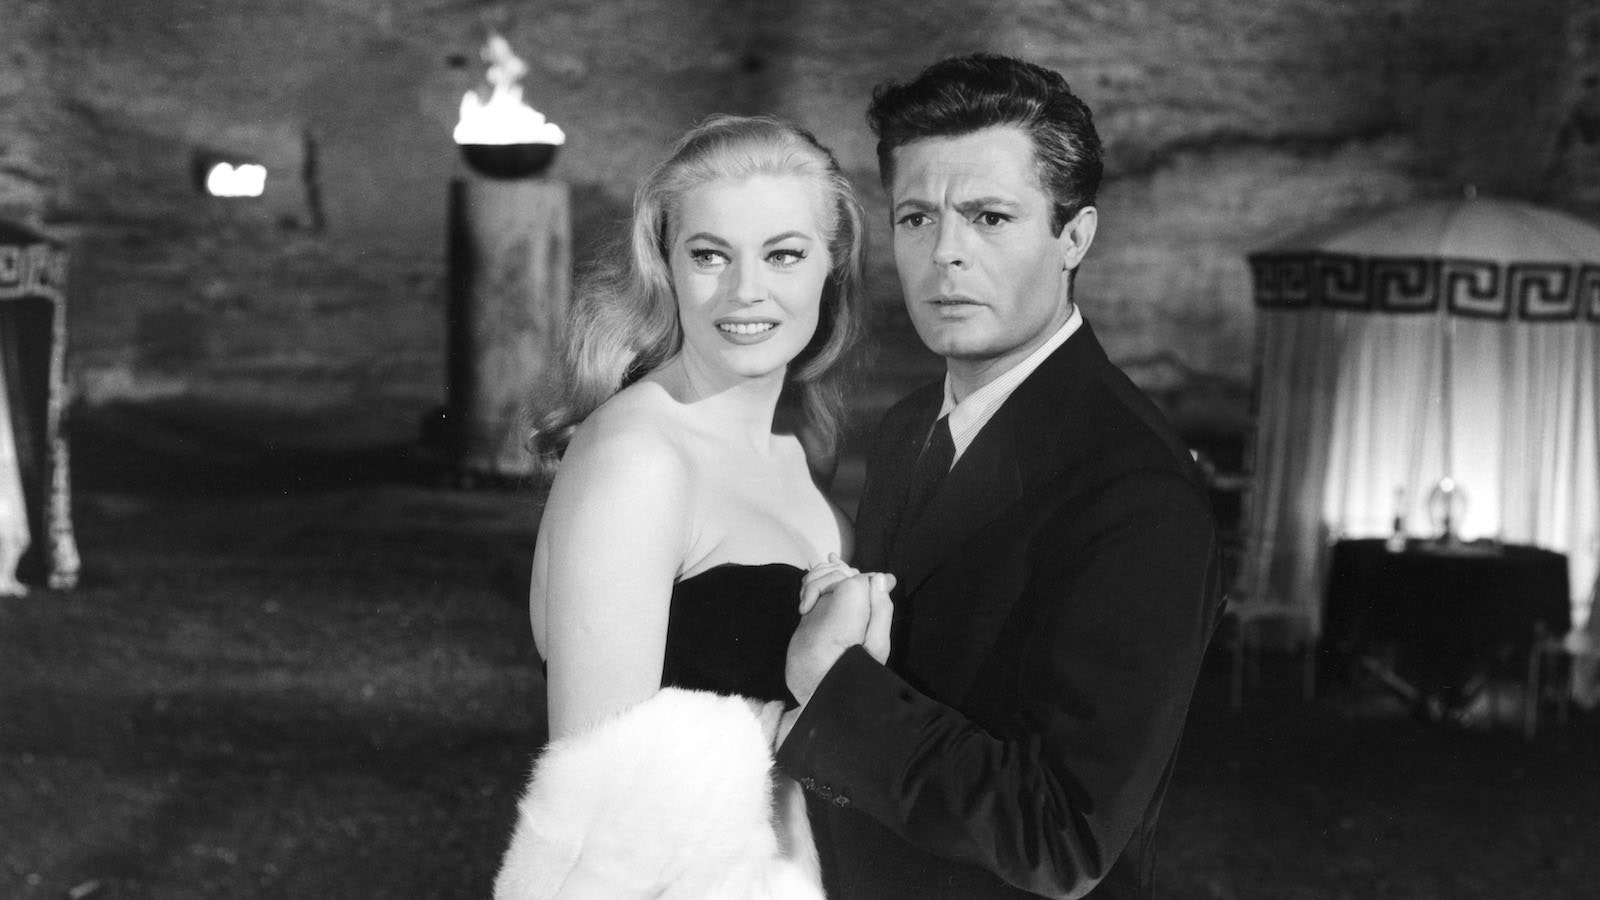 identificatie systeem Belonend La Dolce Vita - Now Playing In Theater at Metrograph